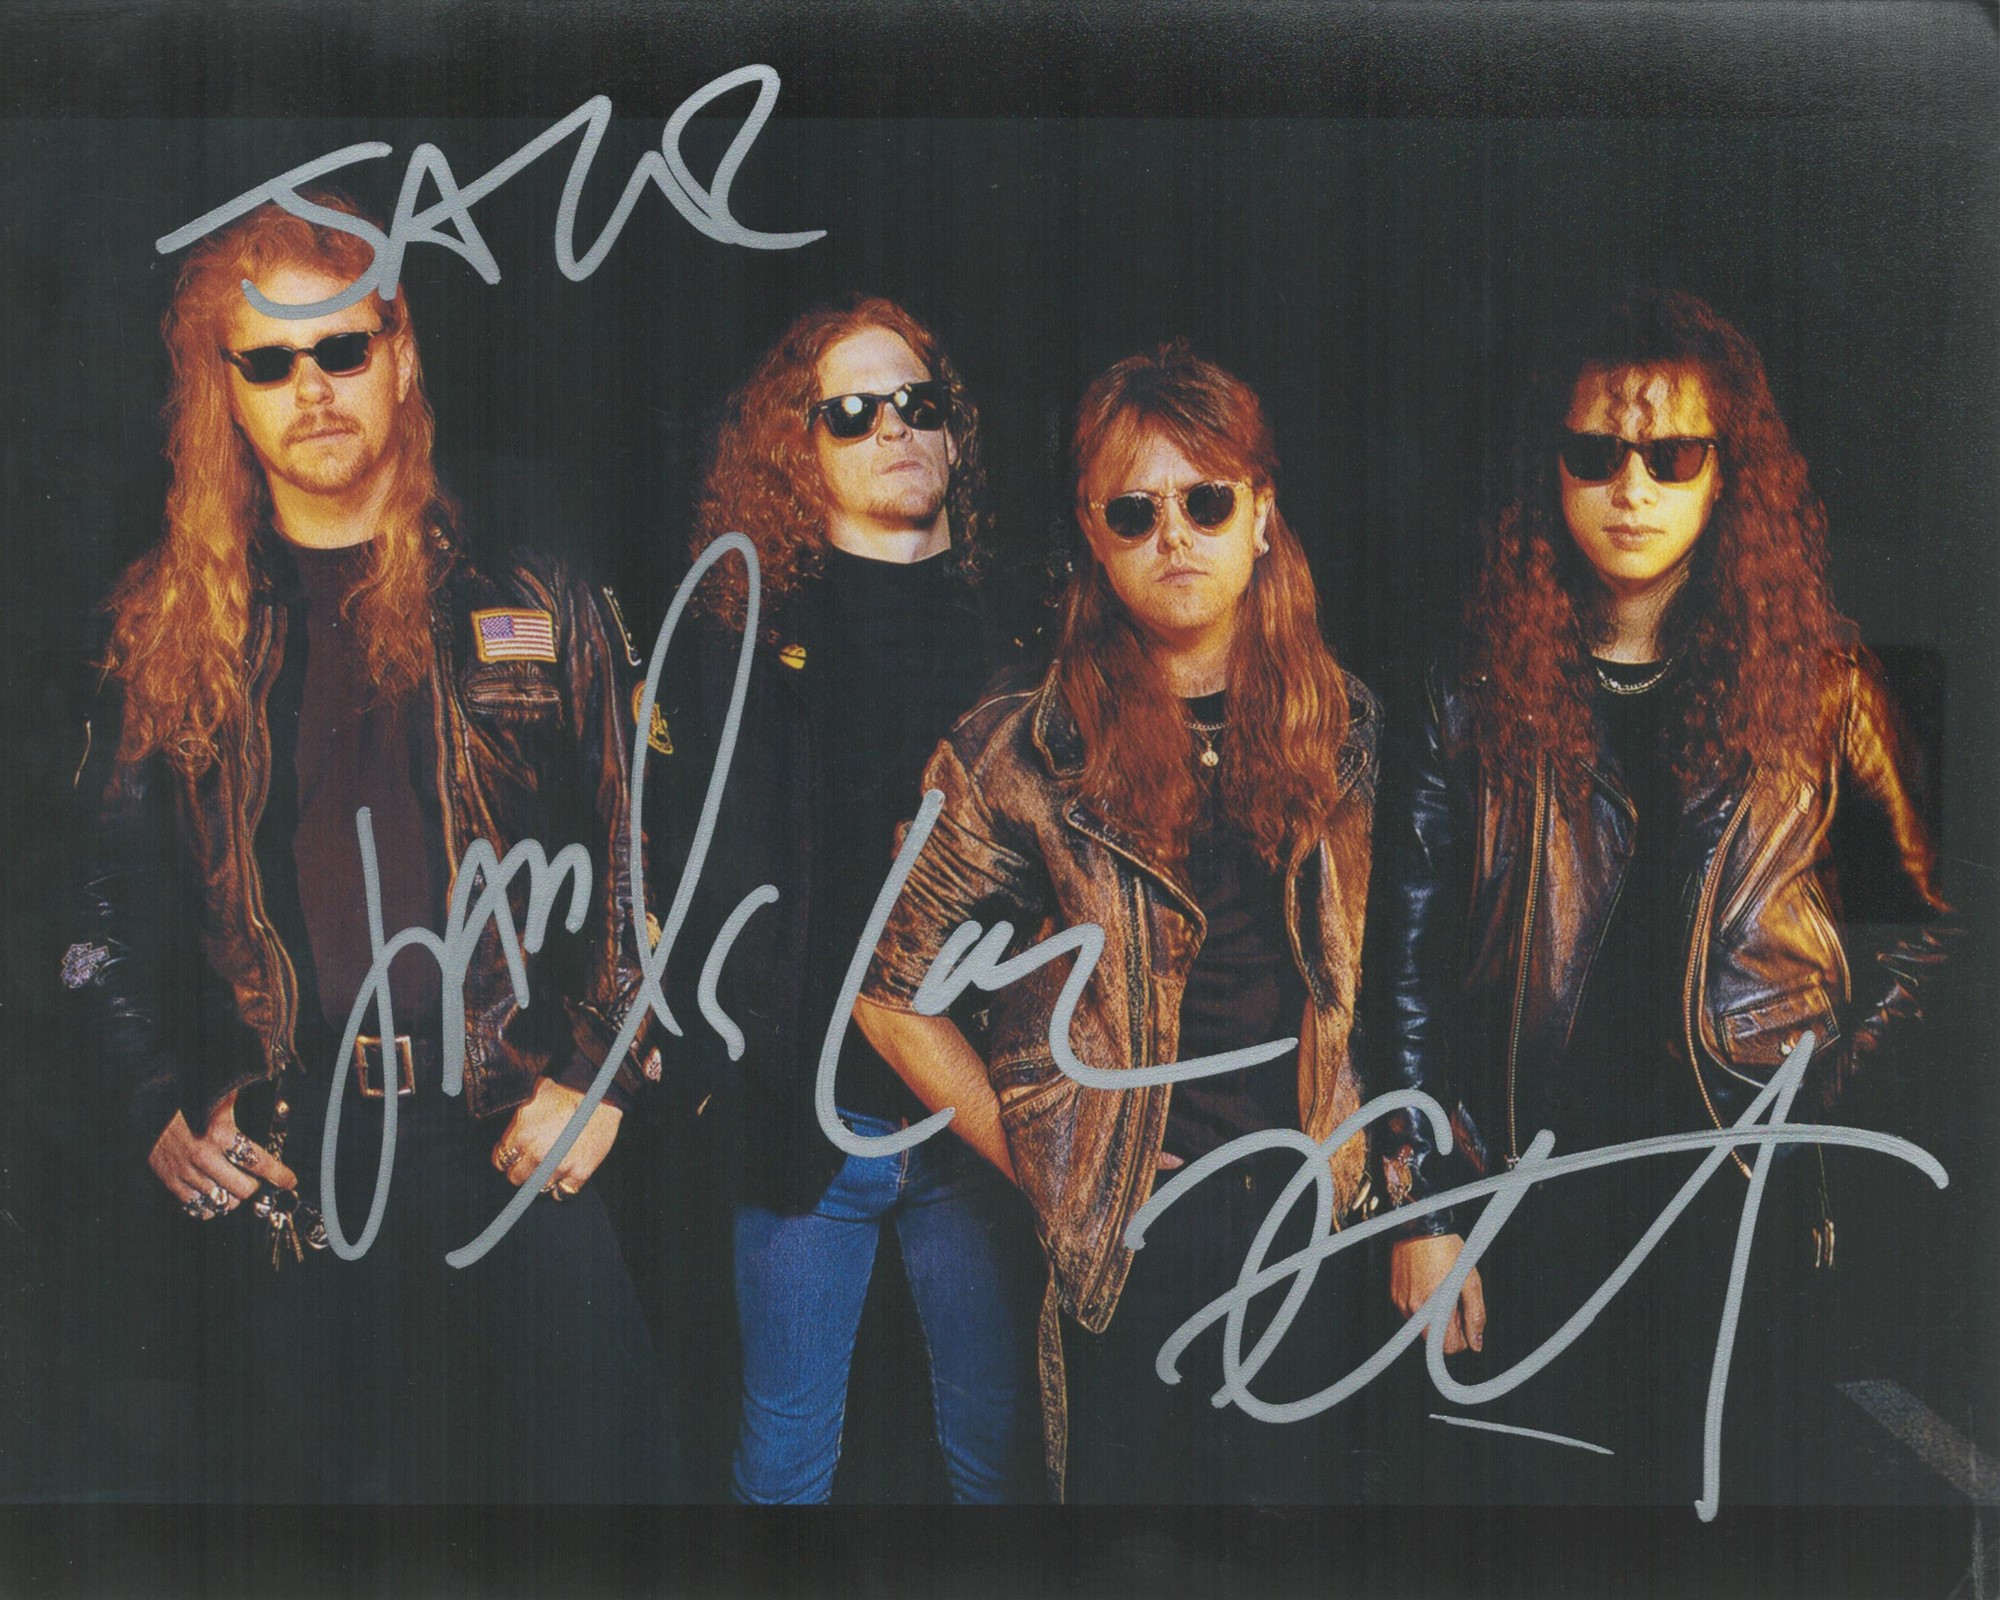 Metallica multi signed 10x8 inch colour photo signed by four band members. Good condition. All